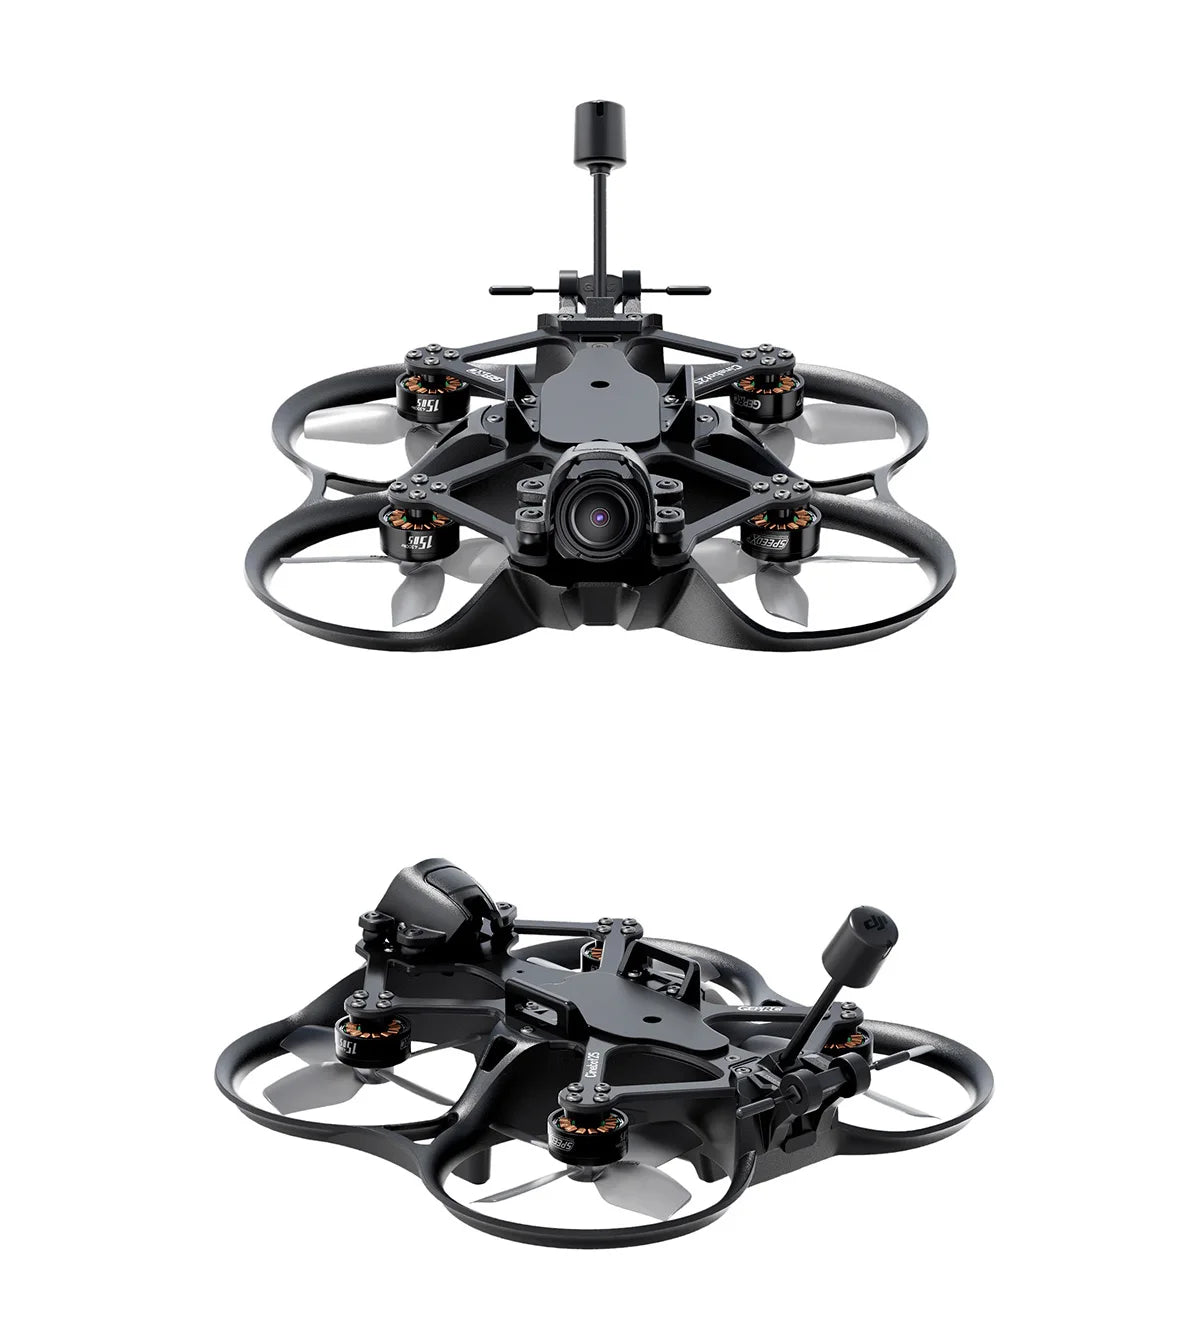 GEPRC Cinebot25 S HD Wasp FPV Drone, make sure the flying environment is safe and away from people when flying the model 3 .